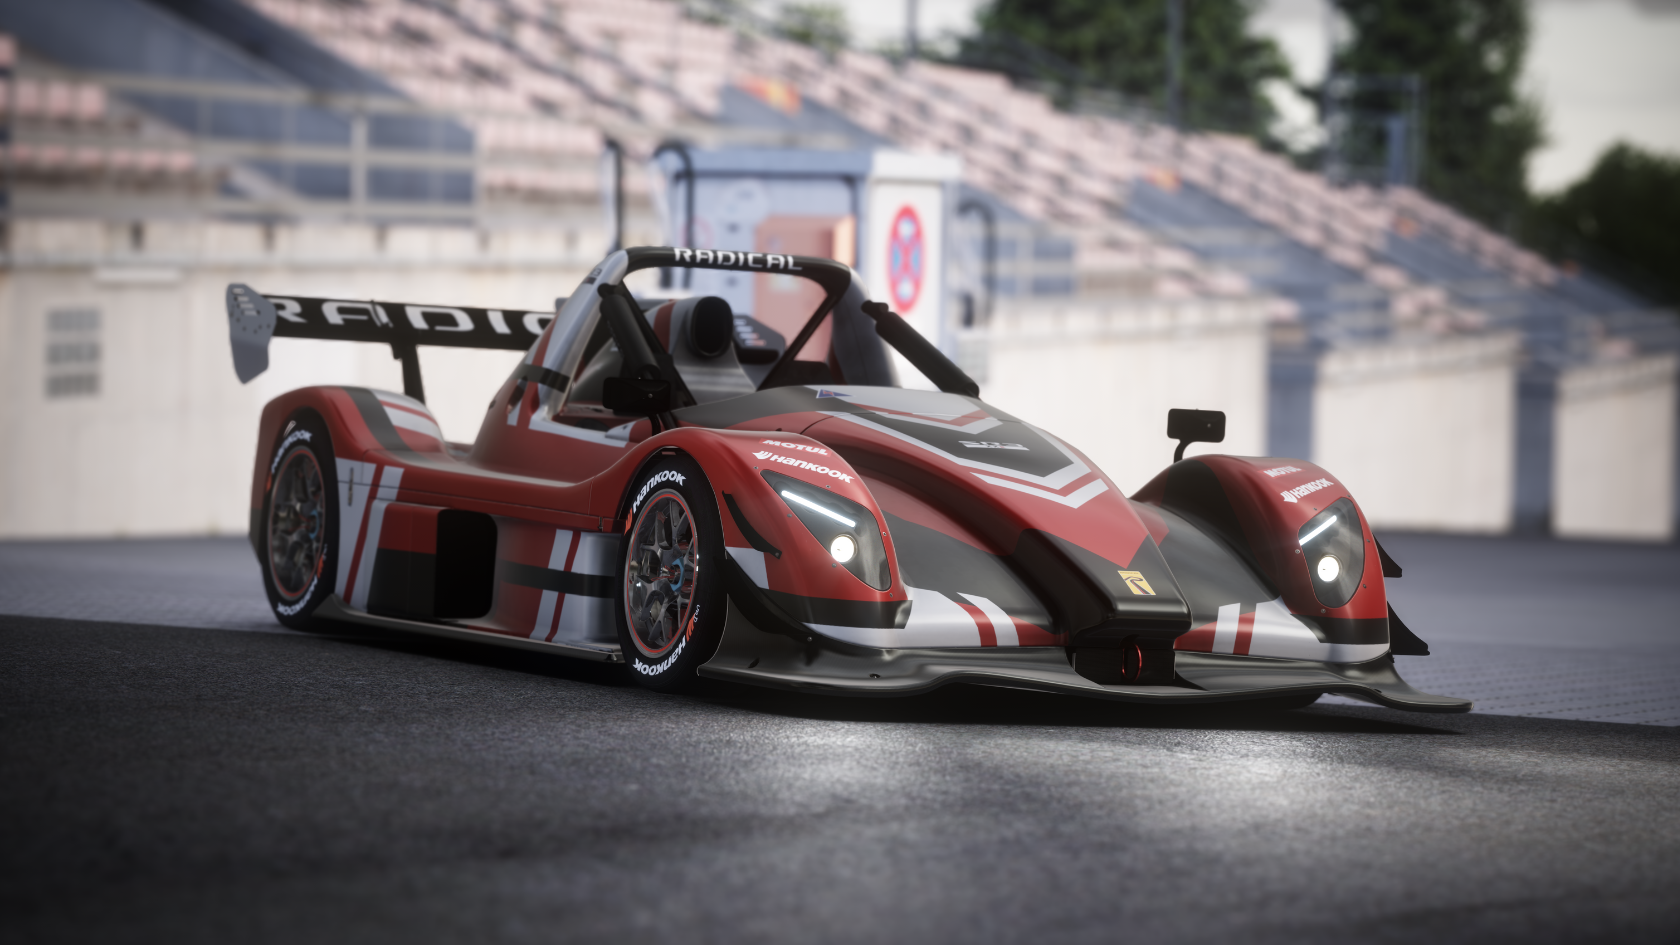 New SR3 XXR now available for Assetto Corsa